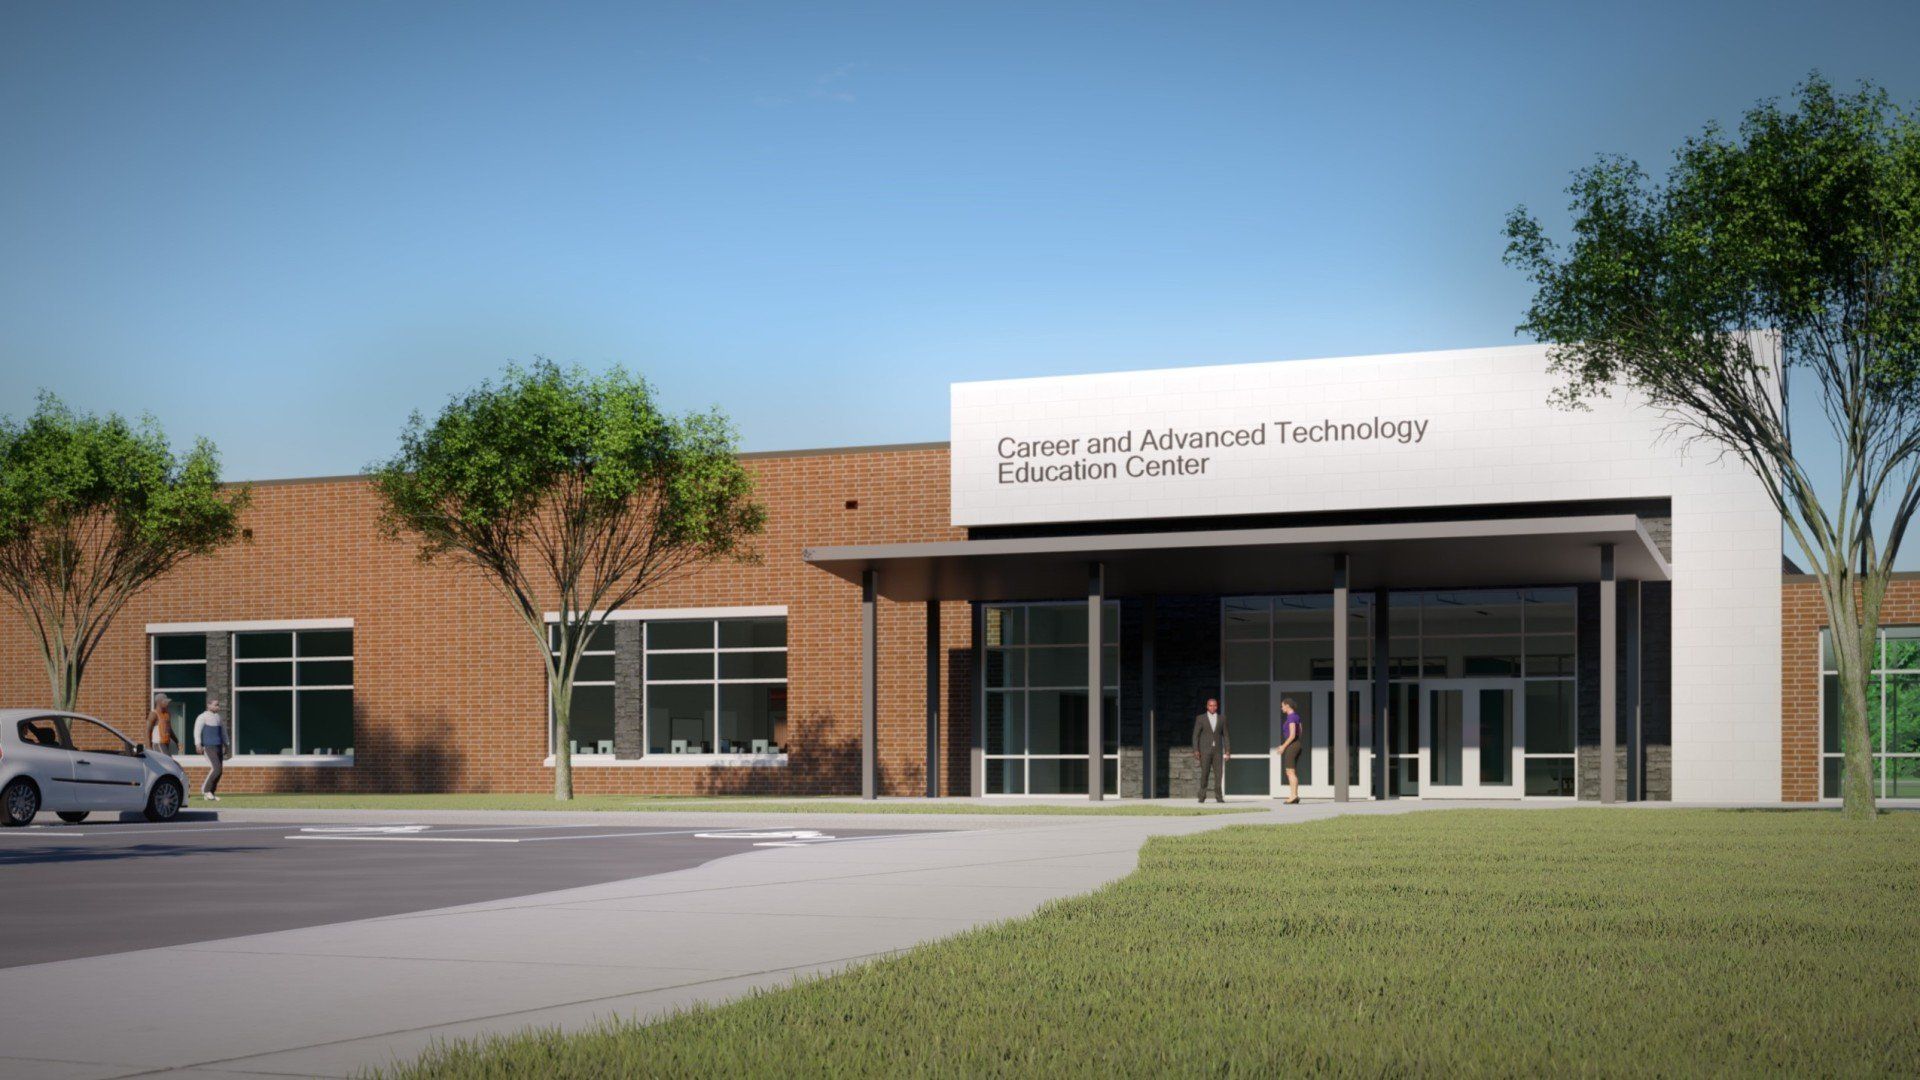 an artist 's impression of a new school building